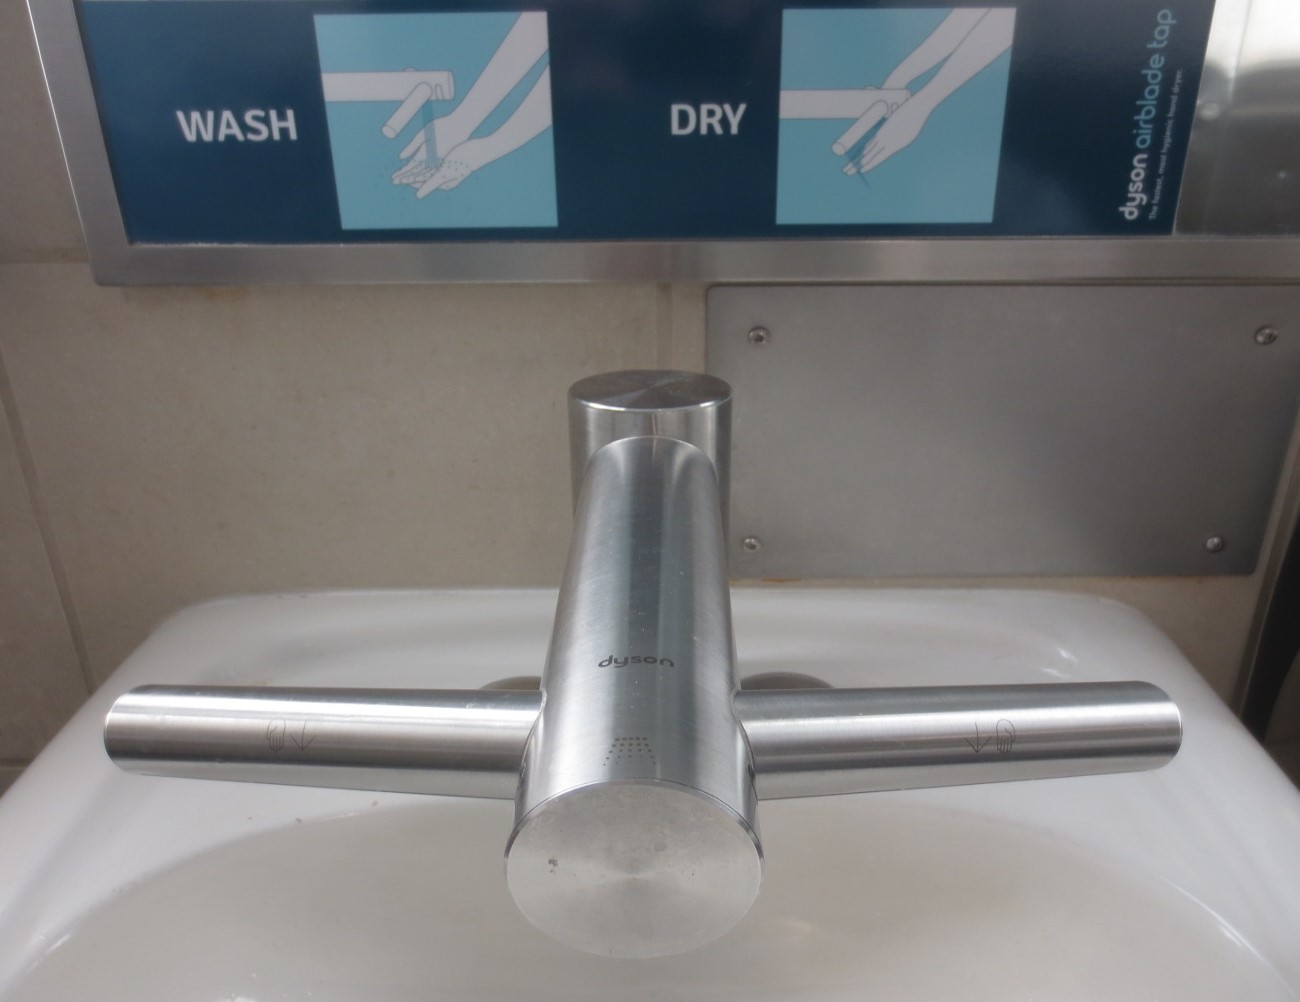 Dyson Airblade Wash and Dry Best Review